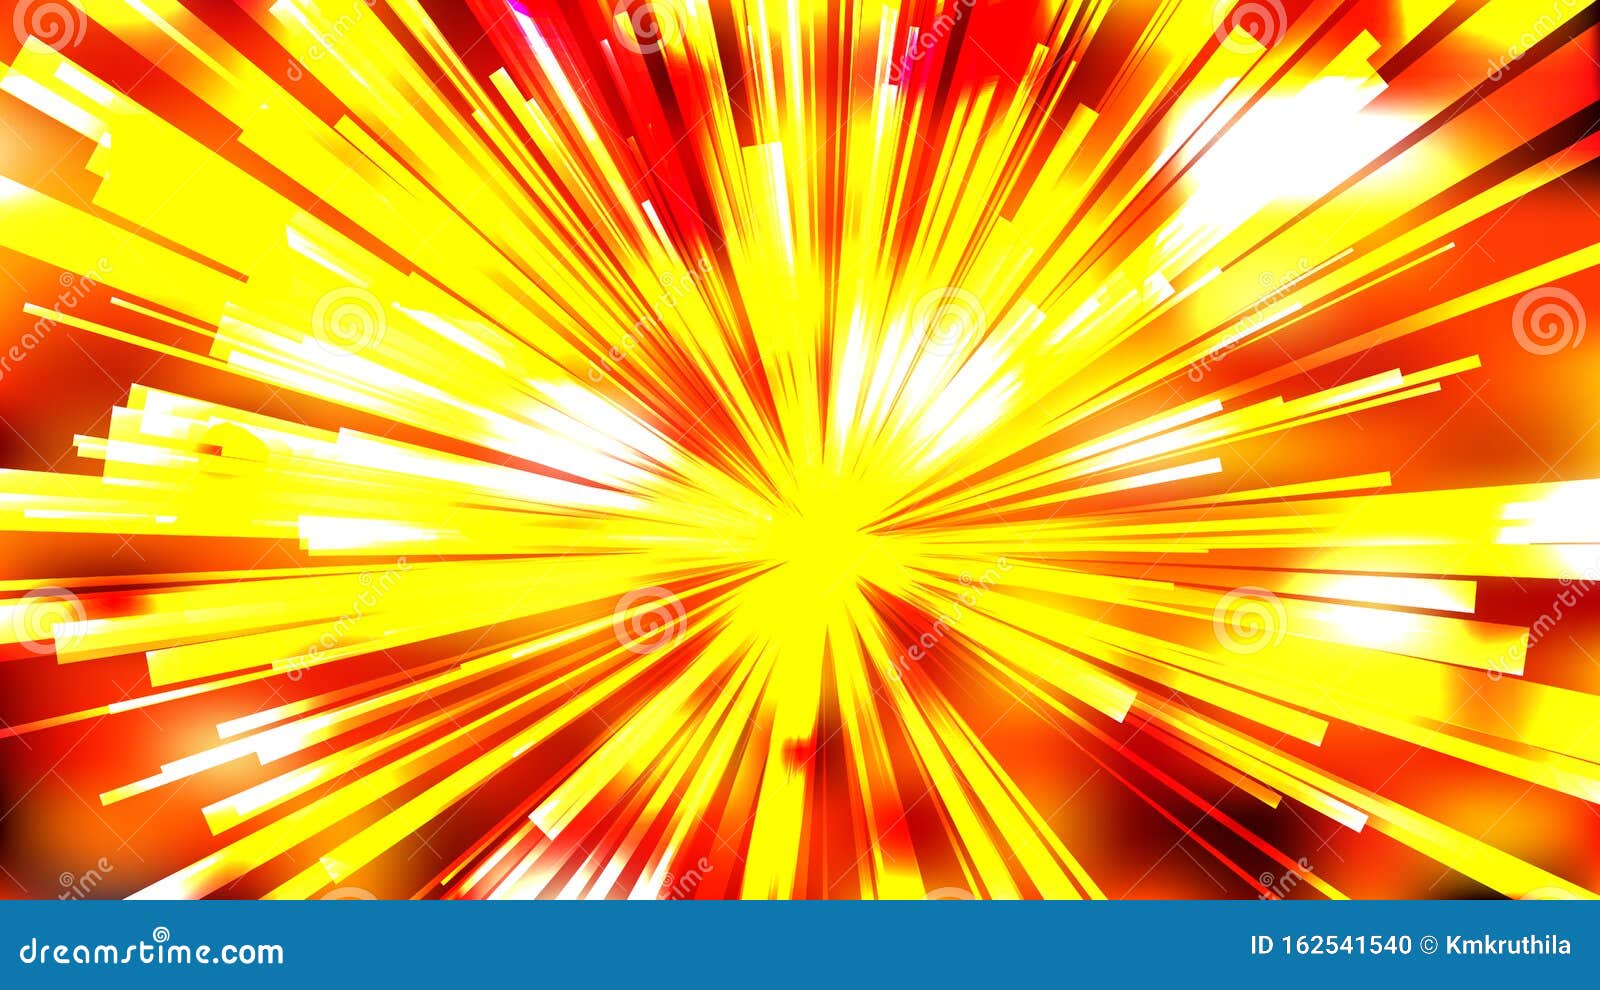 Abstract Red White and Yellow Rays Background Stock Vector - Illustration  of motion, shapes: 162541540